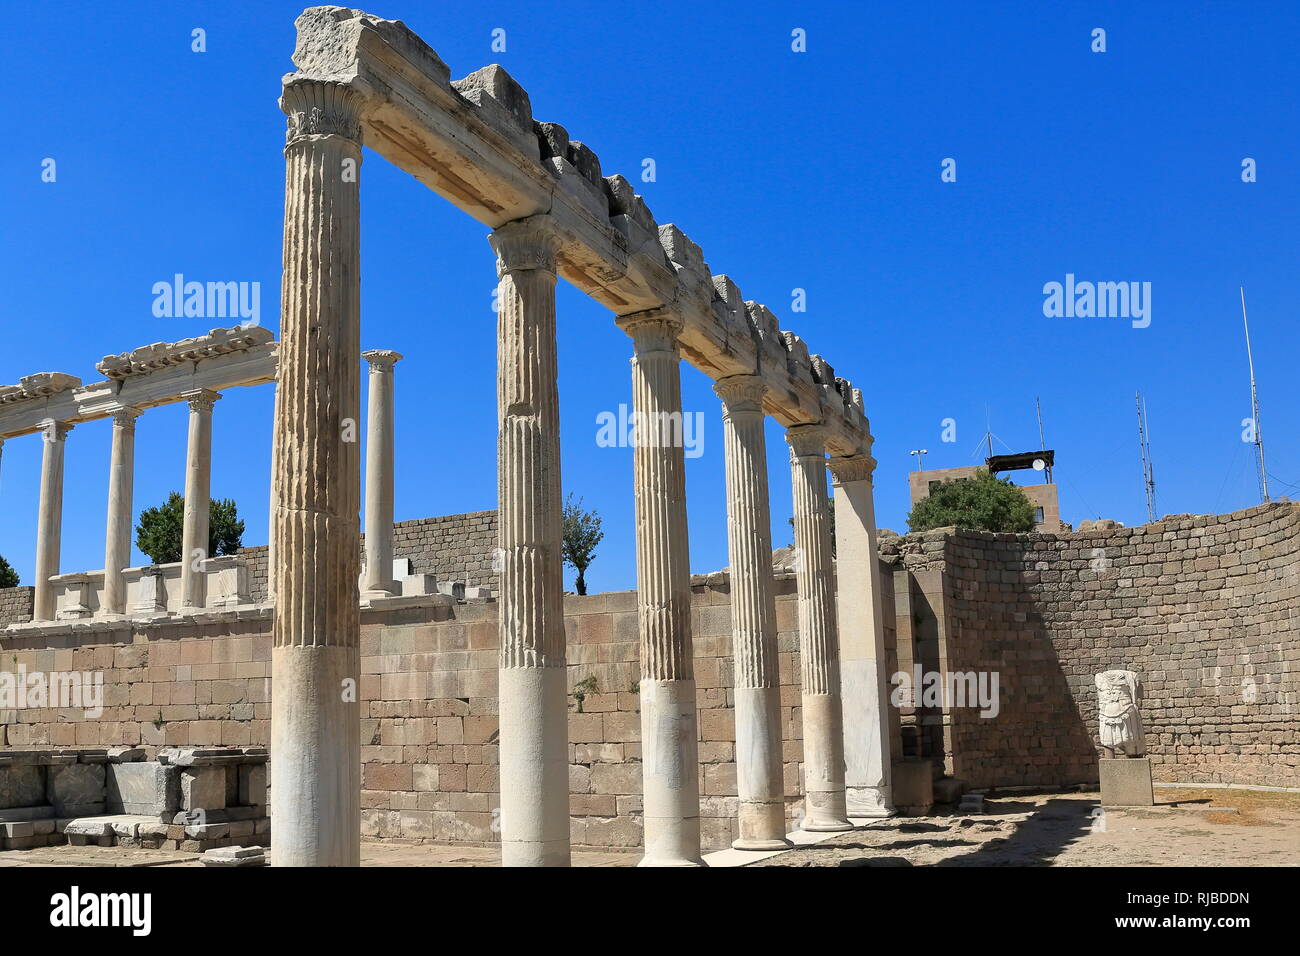 Pergamon, Acropolis-Turkey. The ruins of the temple of Traian temple. It was built during the Roman Emperor Traian period (98-161 AD). Stock Photo